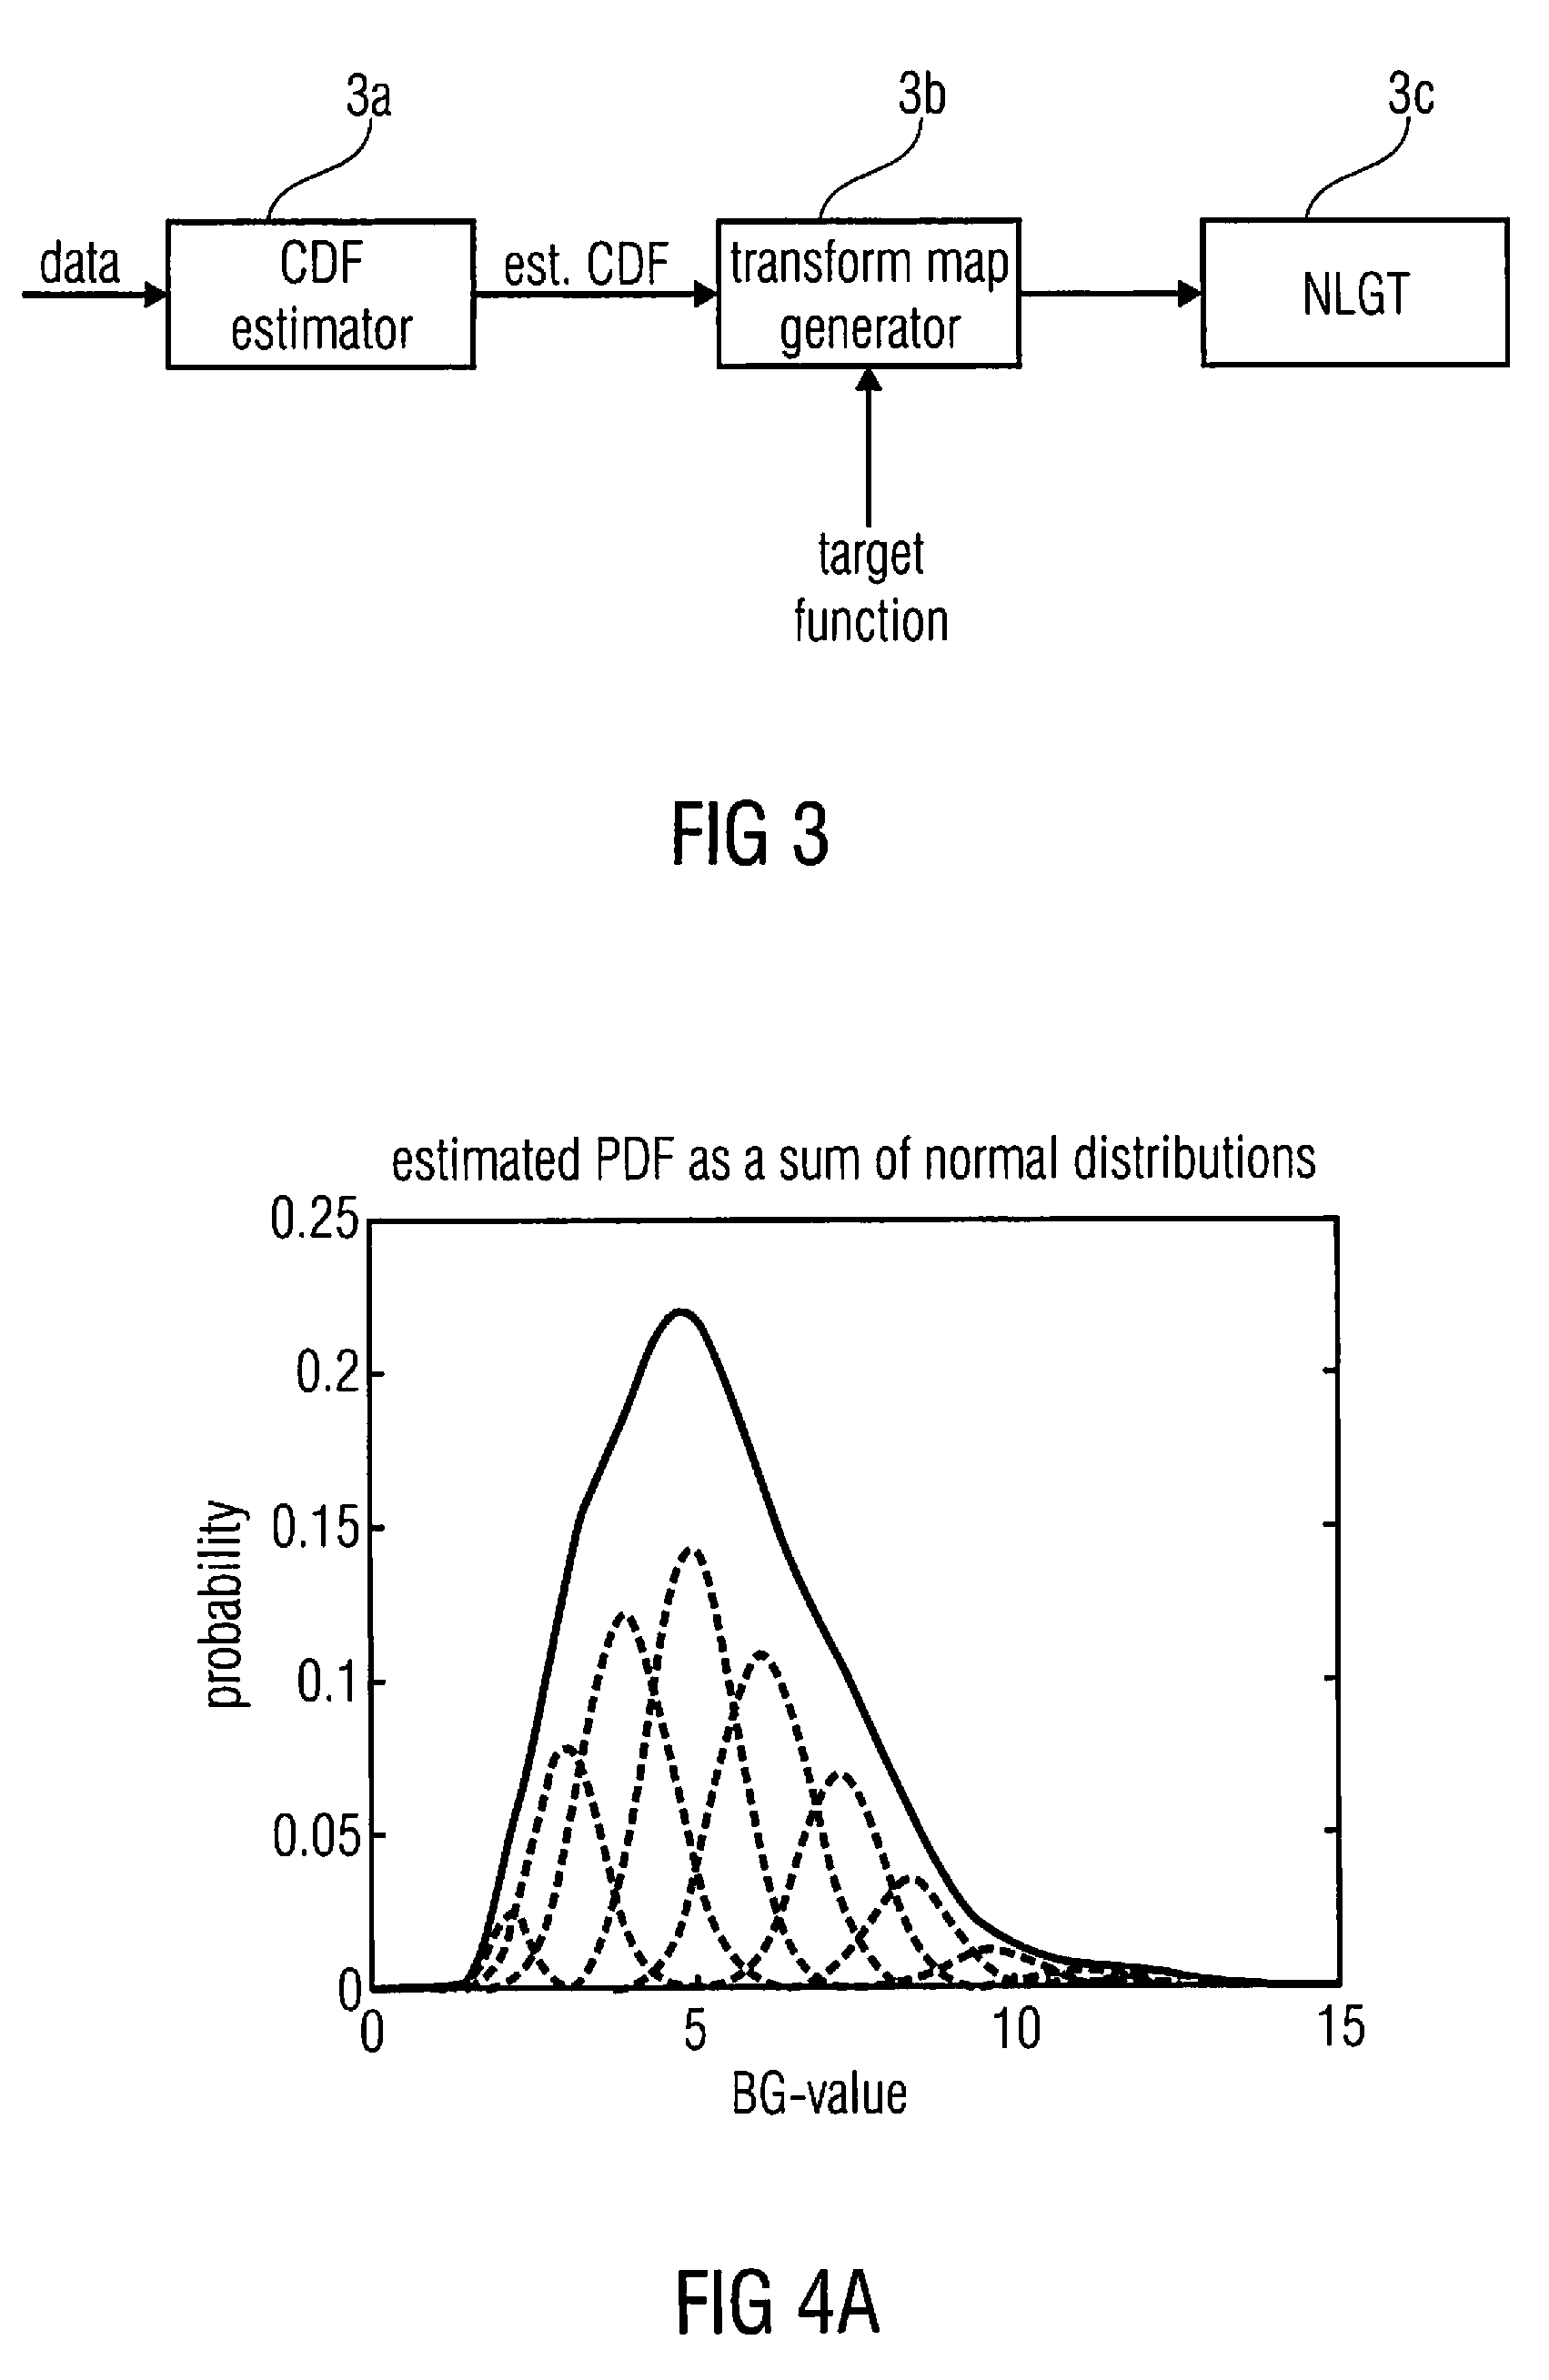 Apparatus and method for processing glycemic data